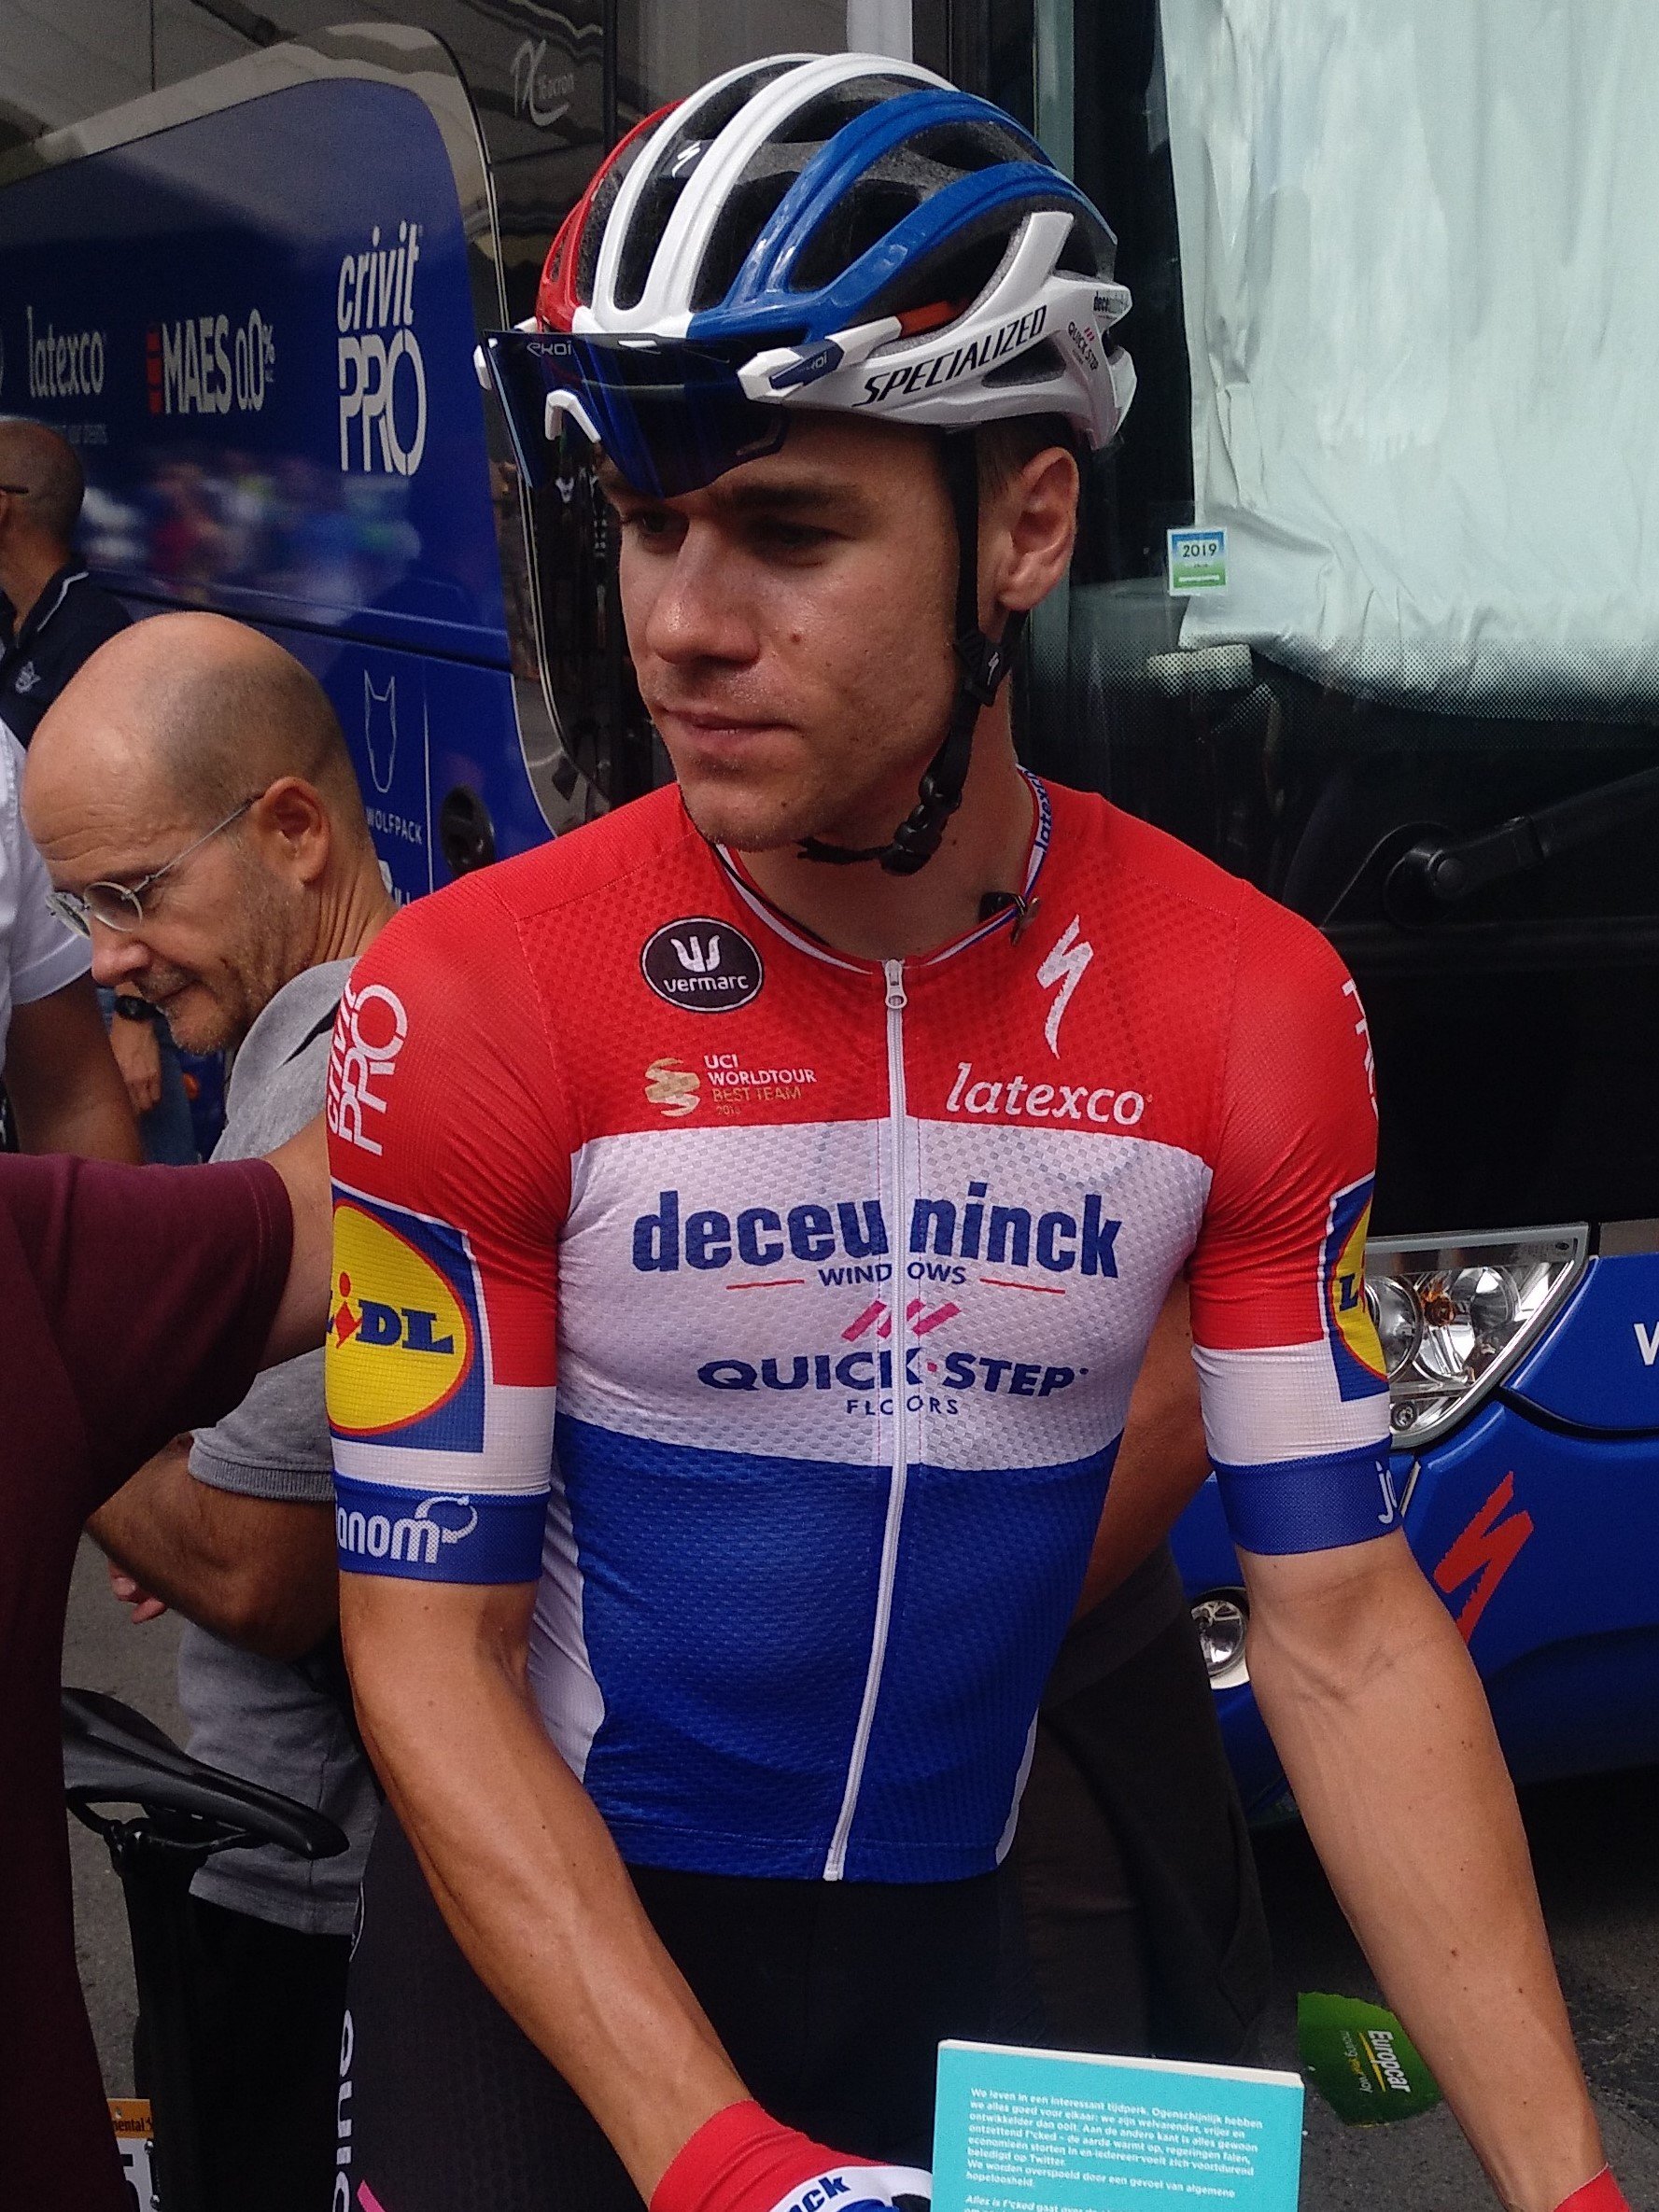 Fabio Jakobsen, from the Deceuninck-Quick Step team, at the start in Bilbao in the 13th stage of the Vuelta a España on September 6, 2019 | Photo: Wikipedia/PB84/Fabio Jakobsen - Vuelta a España 2019/CC BY-SA 4.0